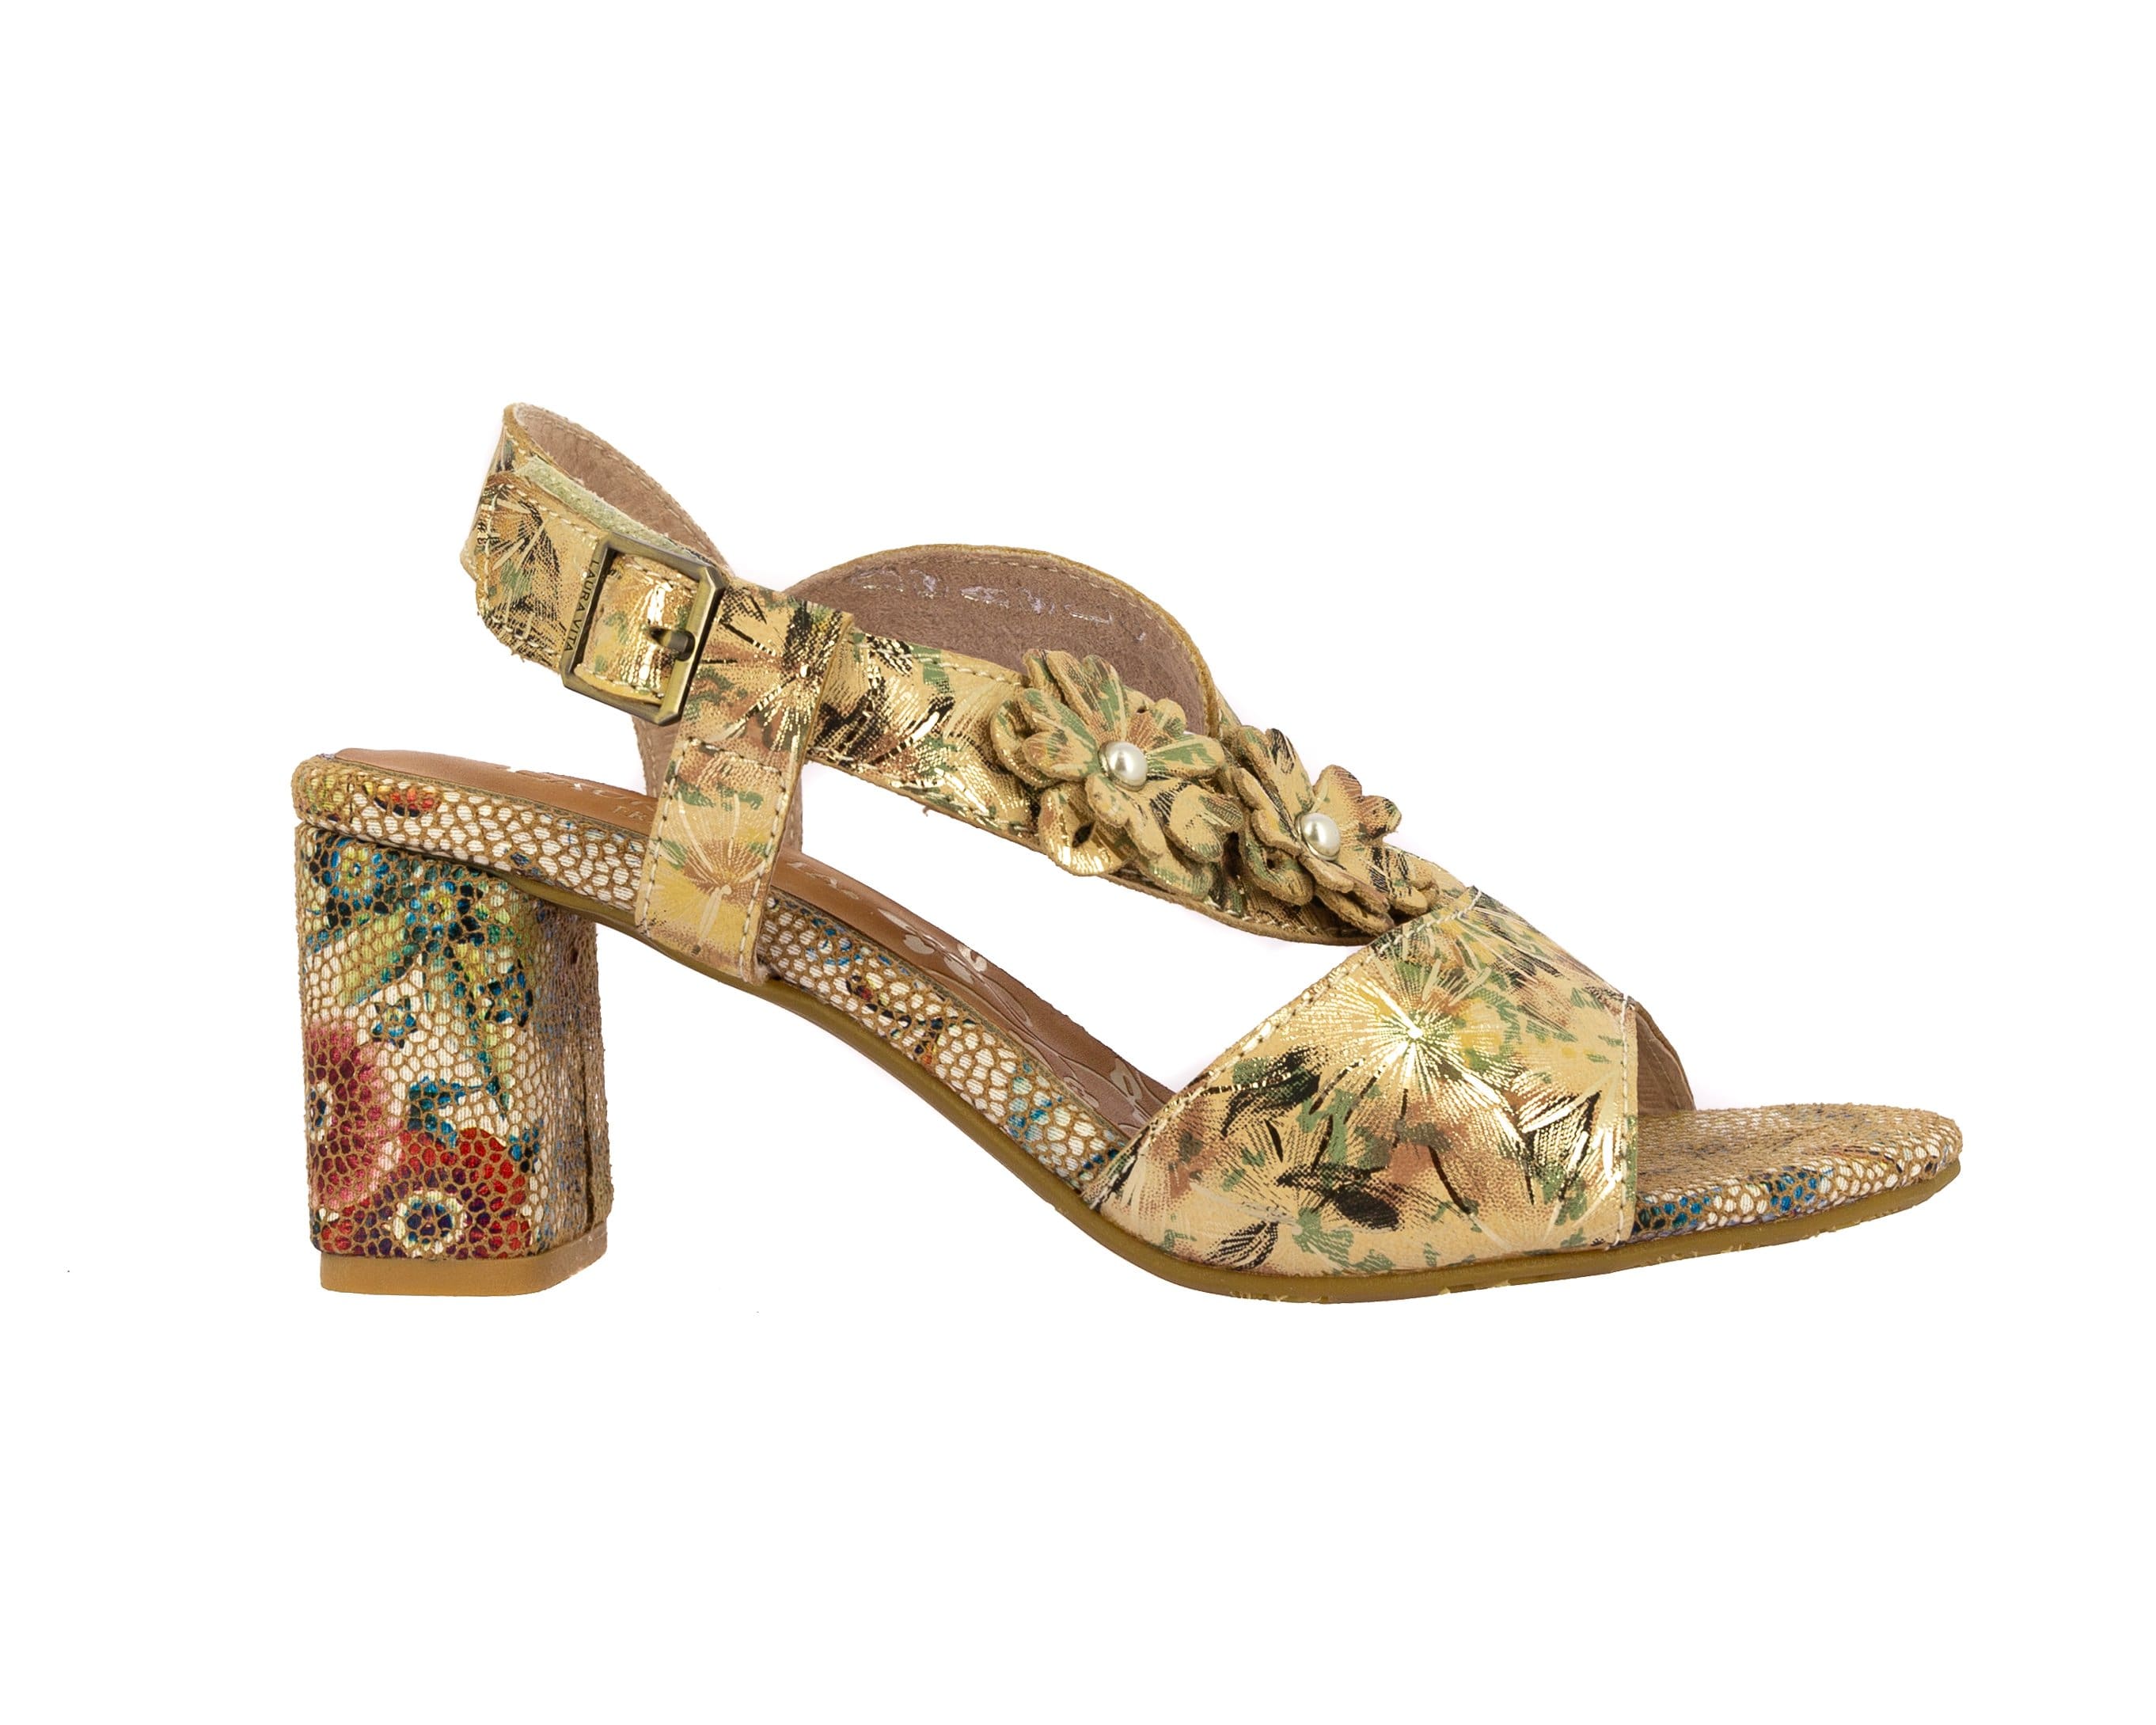 HECO 03 Shoes - 35 / GOLD - Sandal